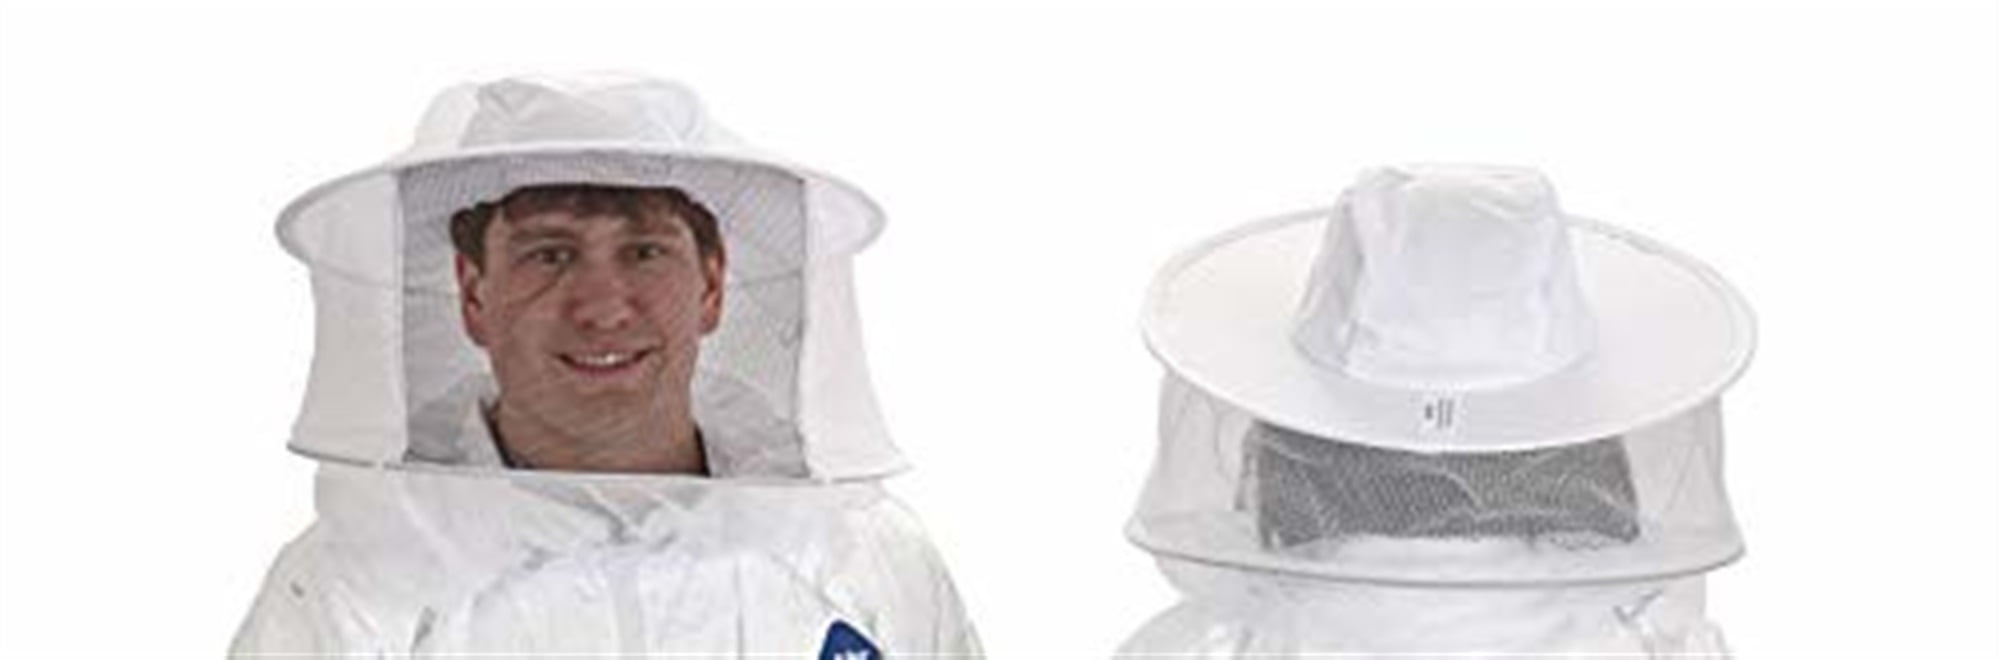 Supplies Beekeeping Hat Veil Face Anti-bee Protection Industrial Practical 